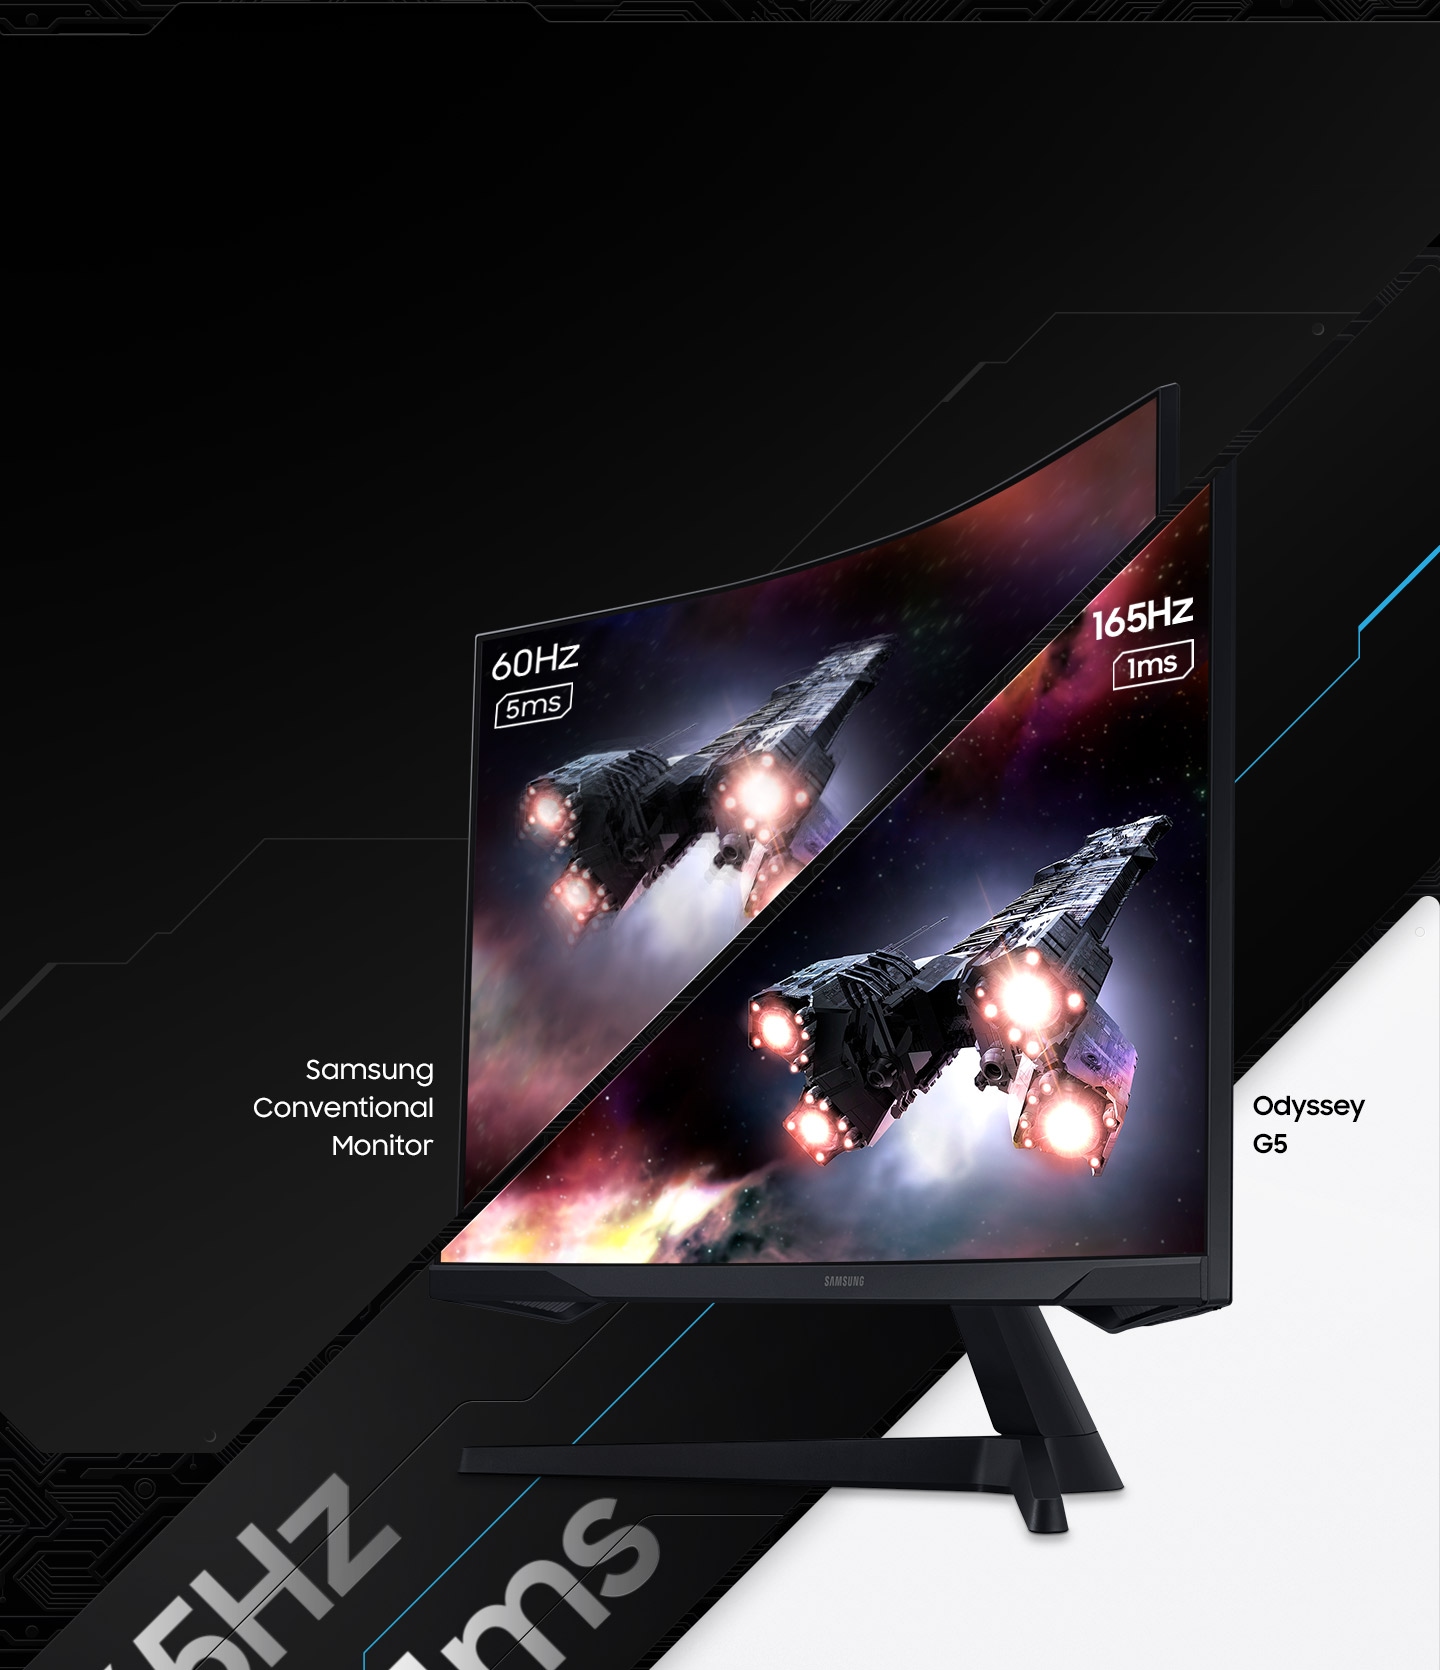 odyssey g5 g55c 32inch 165hz curved qhd ls32cg552euxen 165 Hz refresh rate and 1 ms reaction time